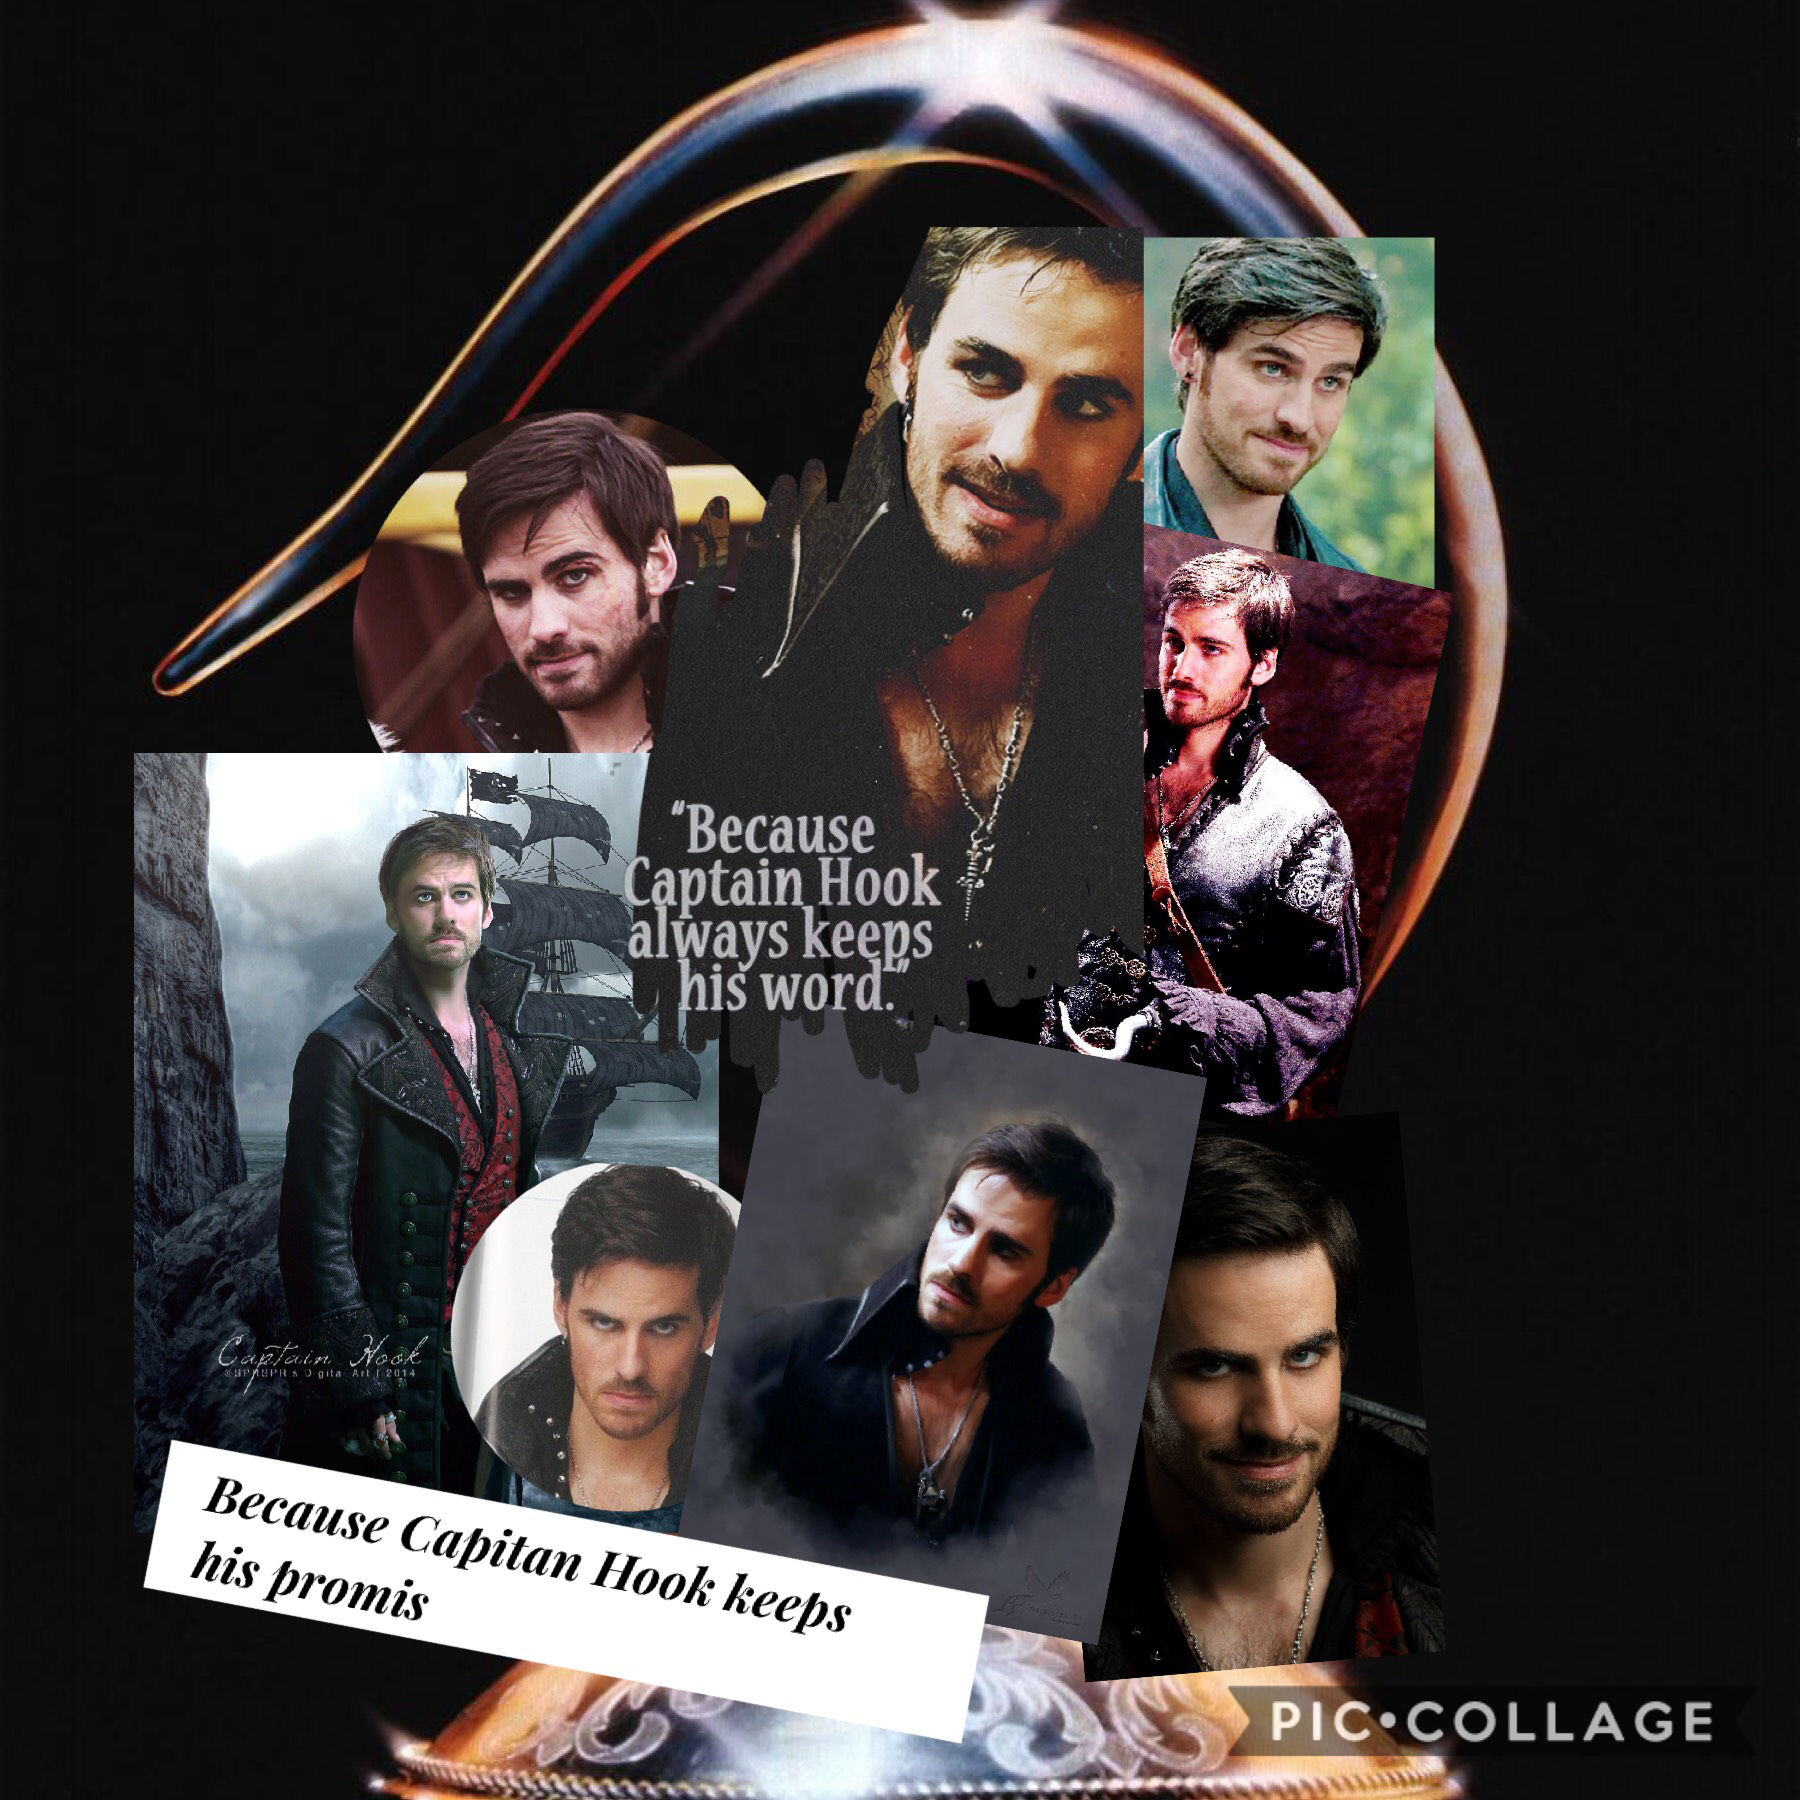 From a Once Upon A Time fan